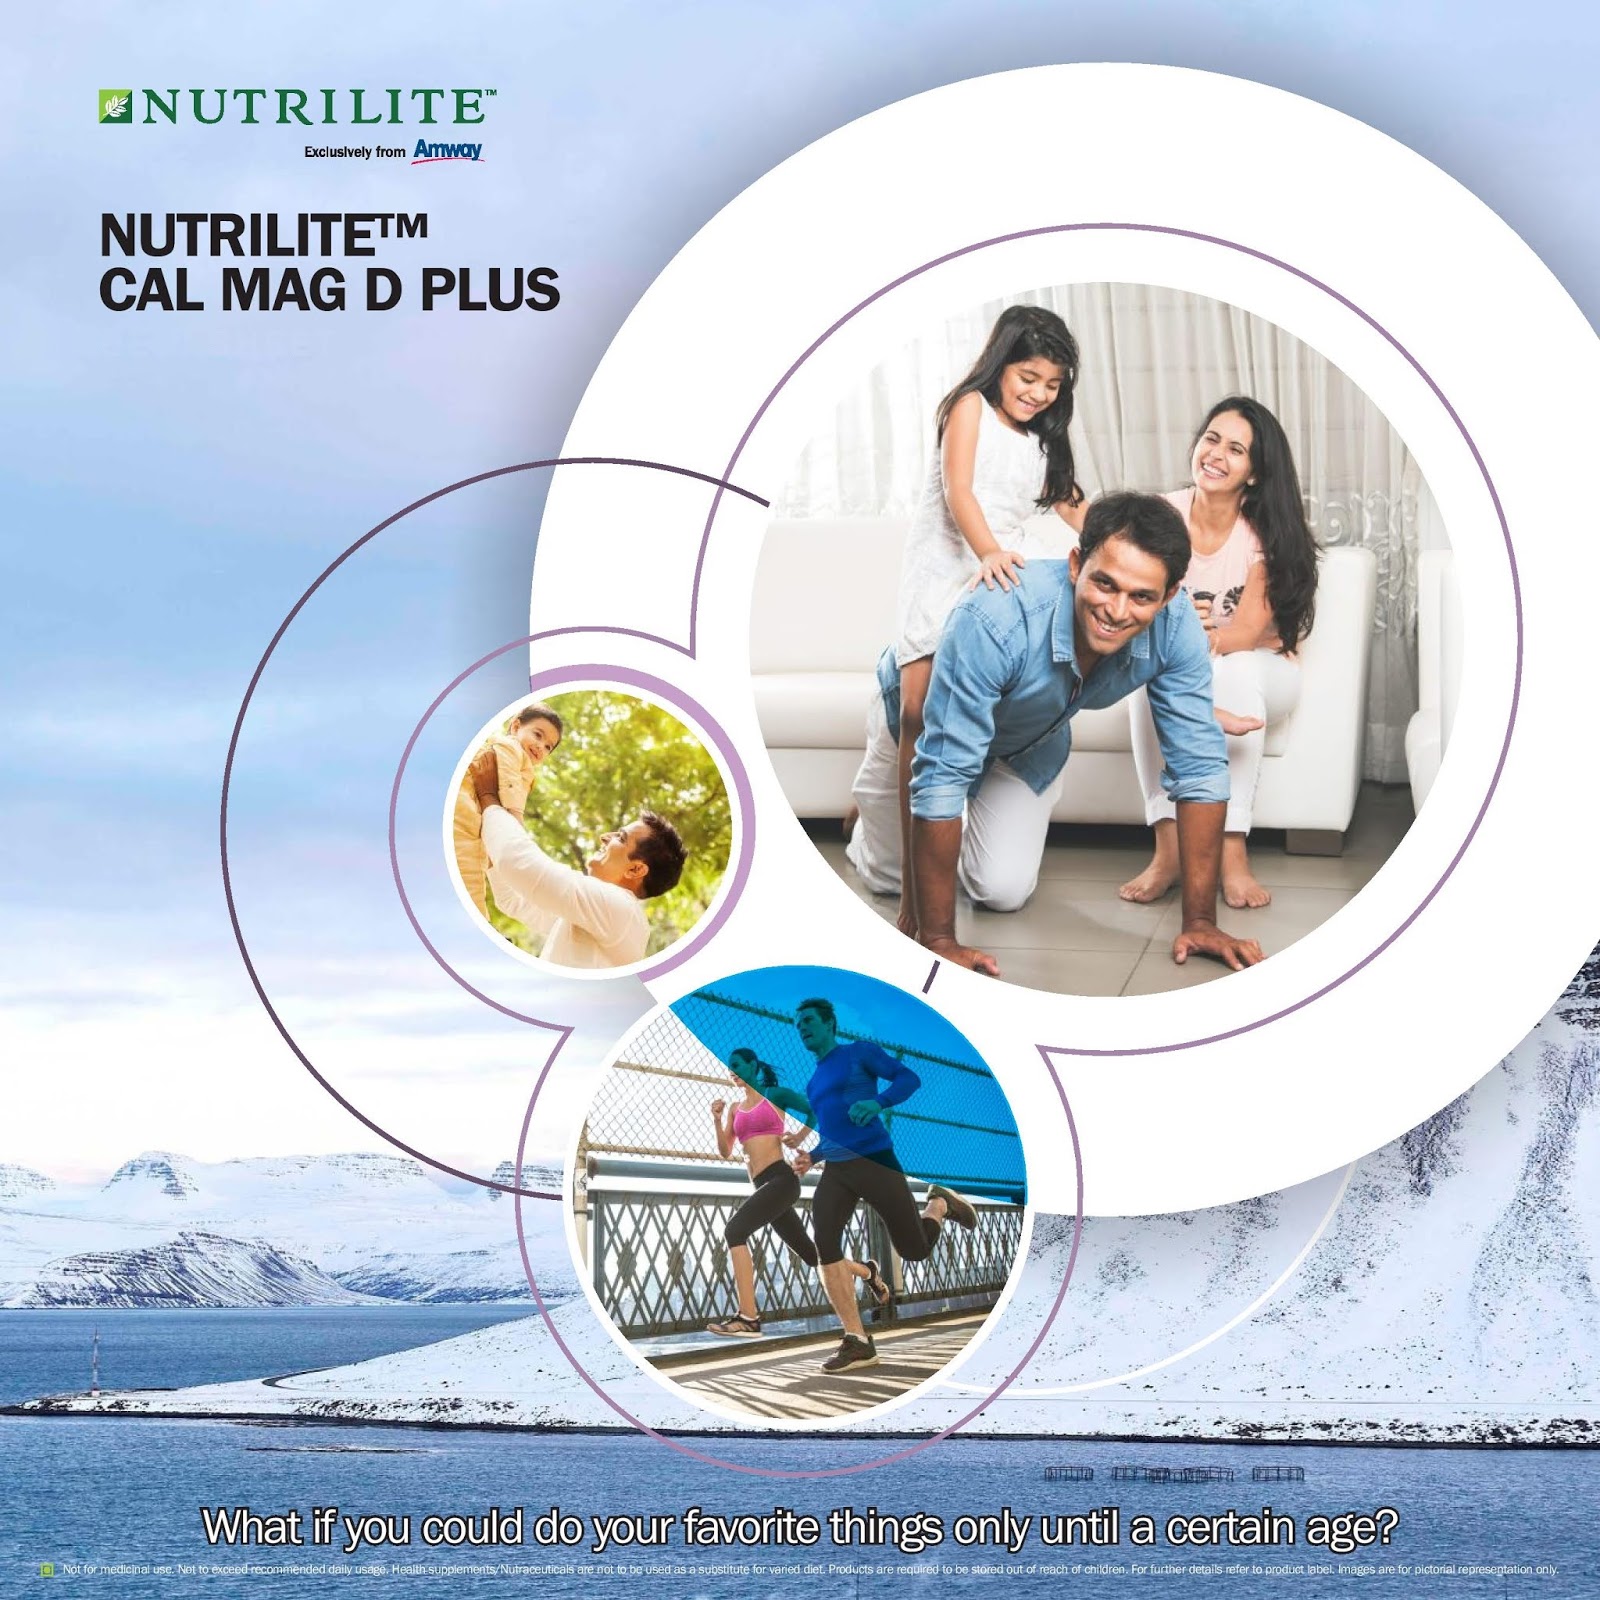 Mag amway cal d plus Amway Nutrilite